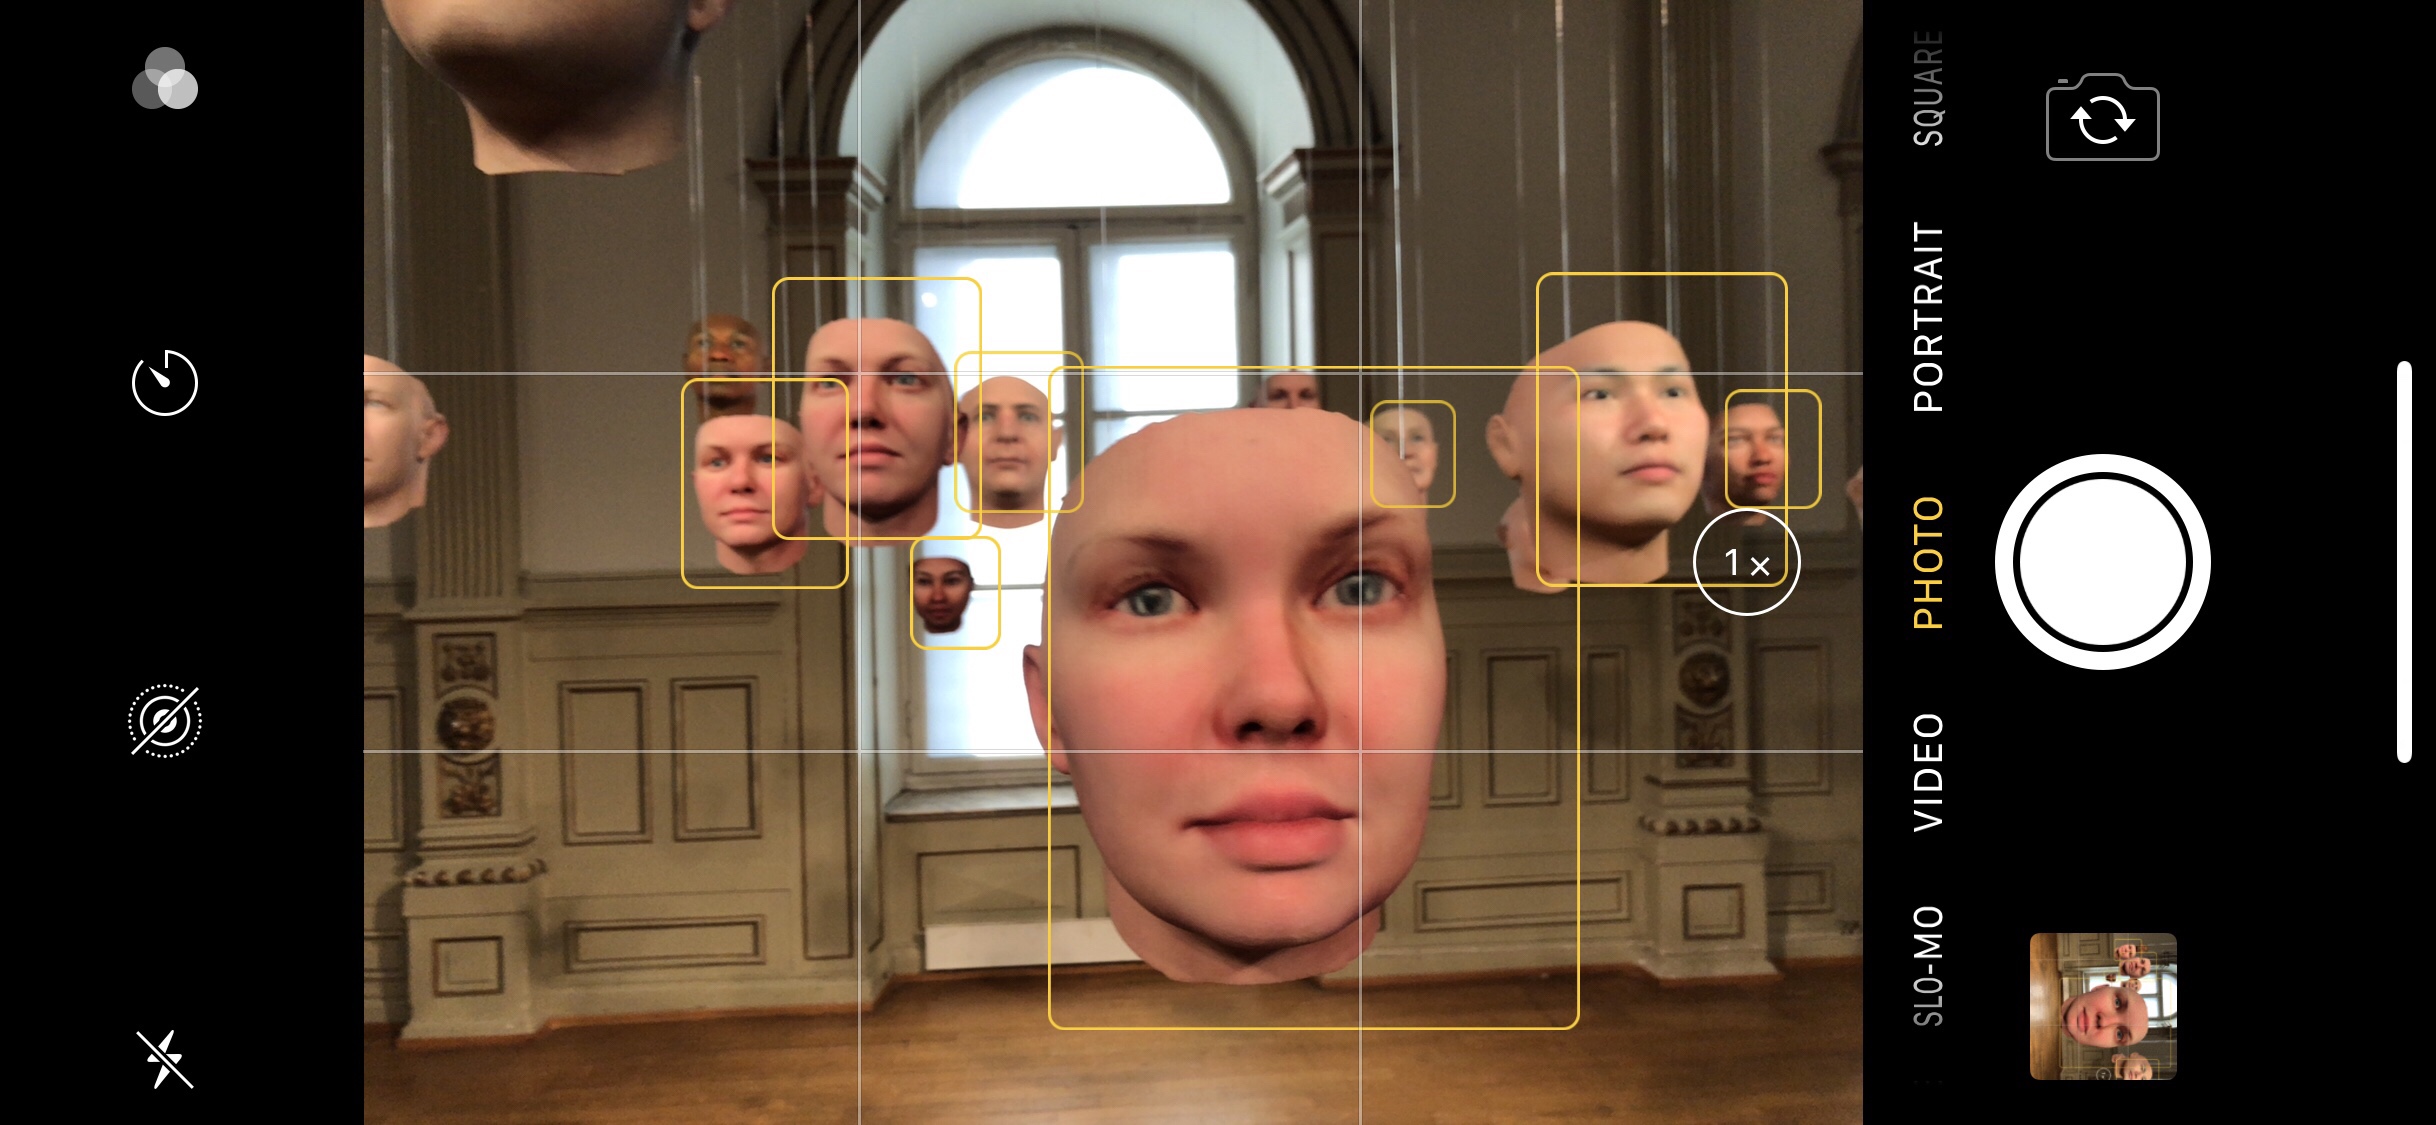 A screenshot of the iPhone camera interface showing hanging masks resembling human faces in an art gallery, and yellow squares around each mask indicating that the phone camera has recognised a human face.